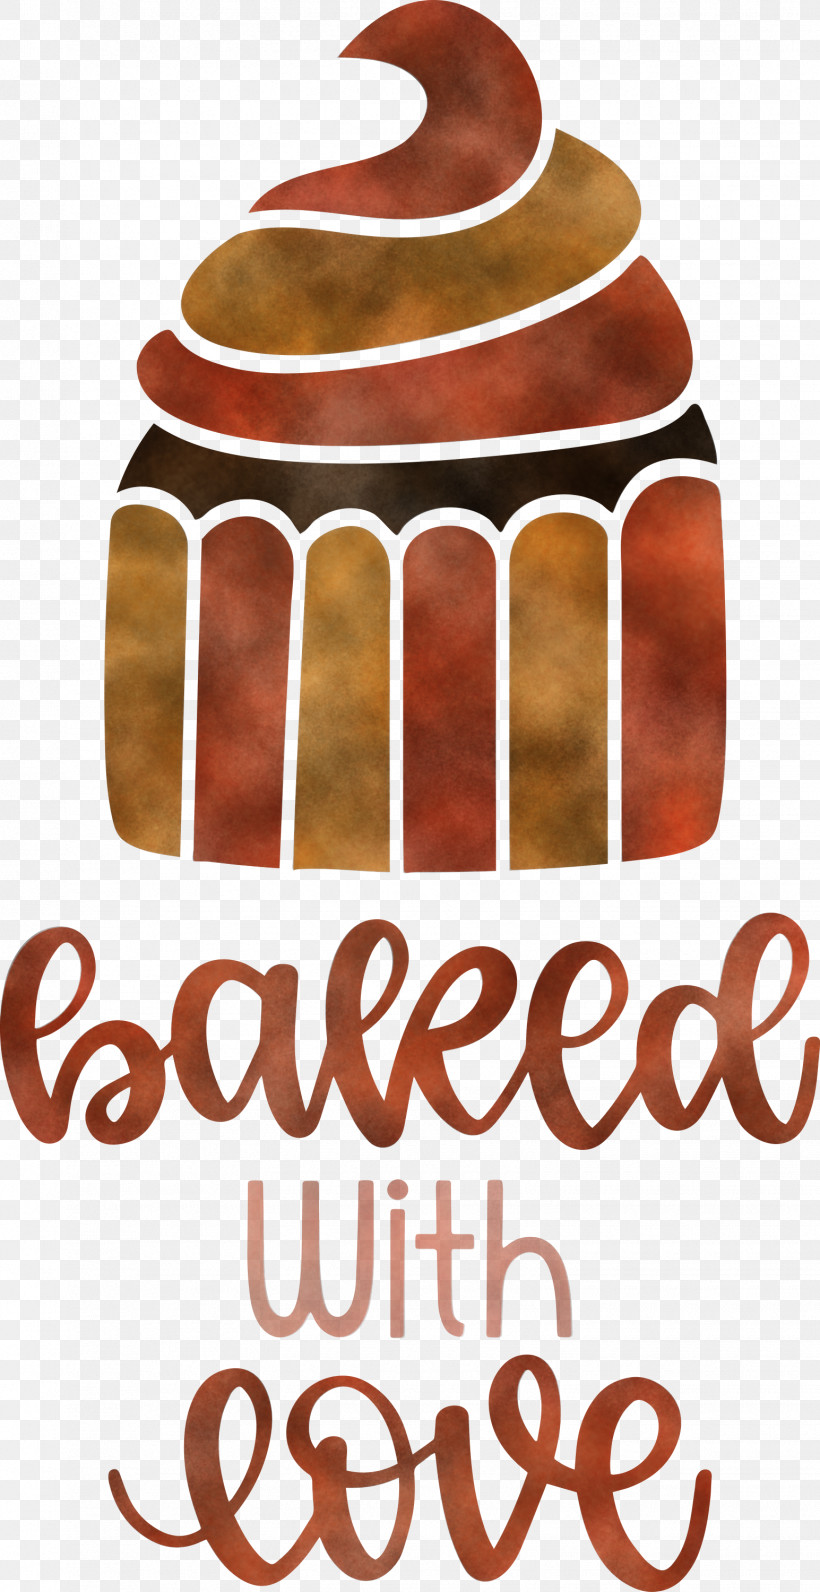 Baked With Love Cupcake Food, PNG, 1545x3000px, Baked With Love, Chocolate, Cupcake, Food, Kitchen Download Free